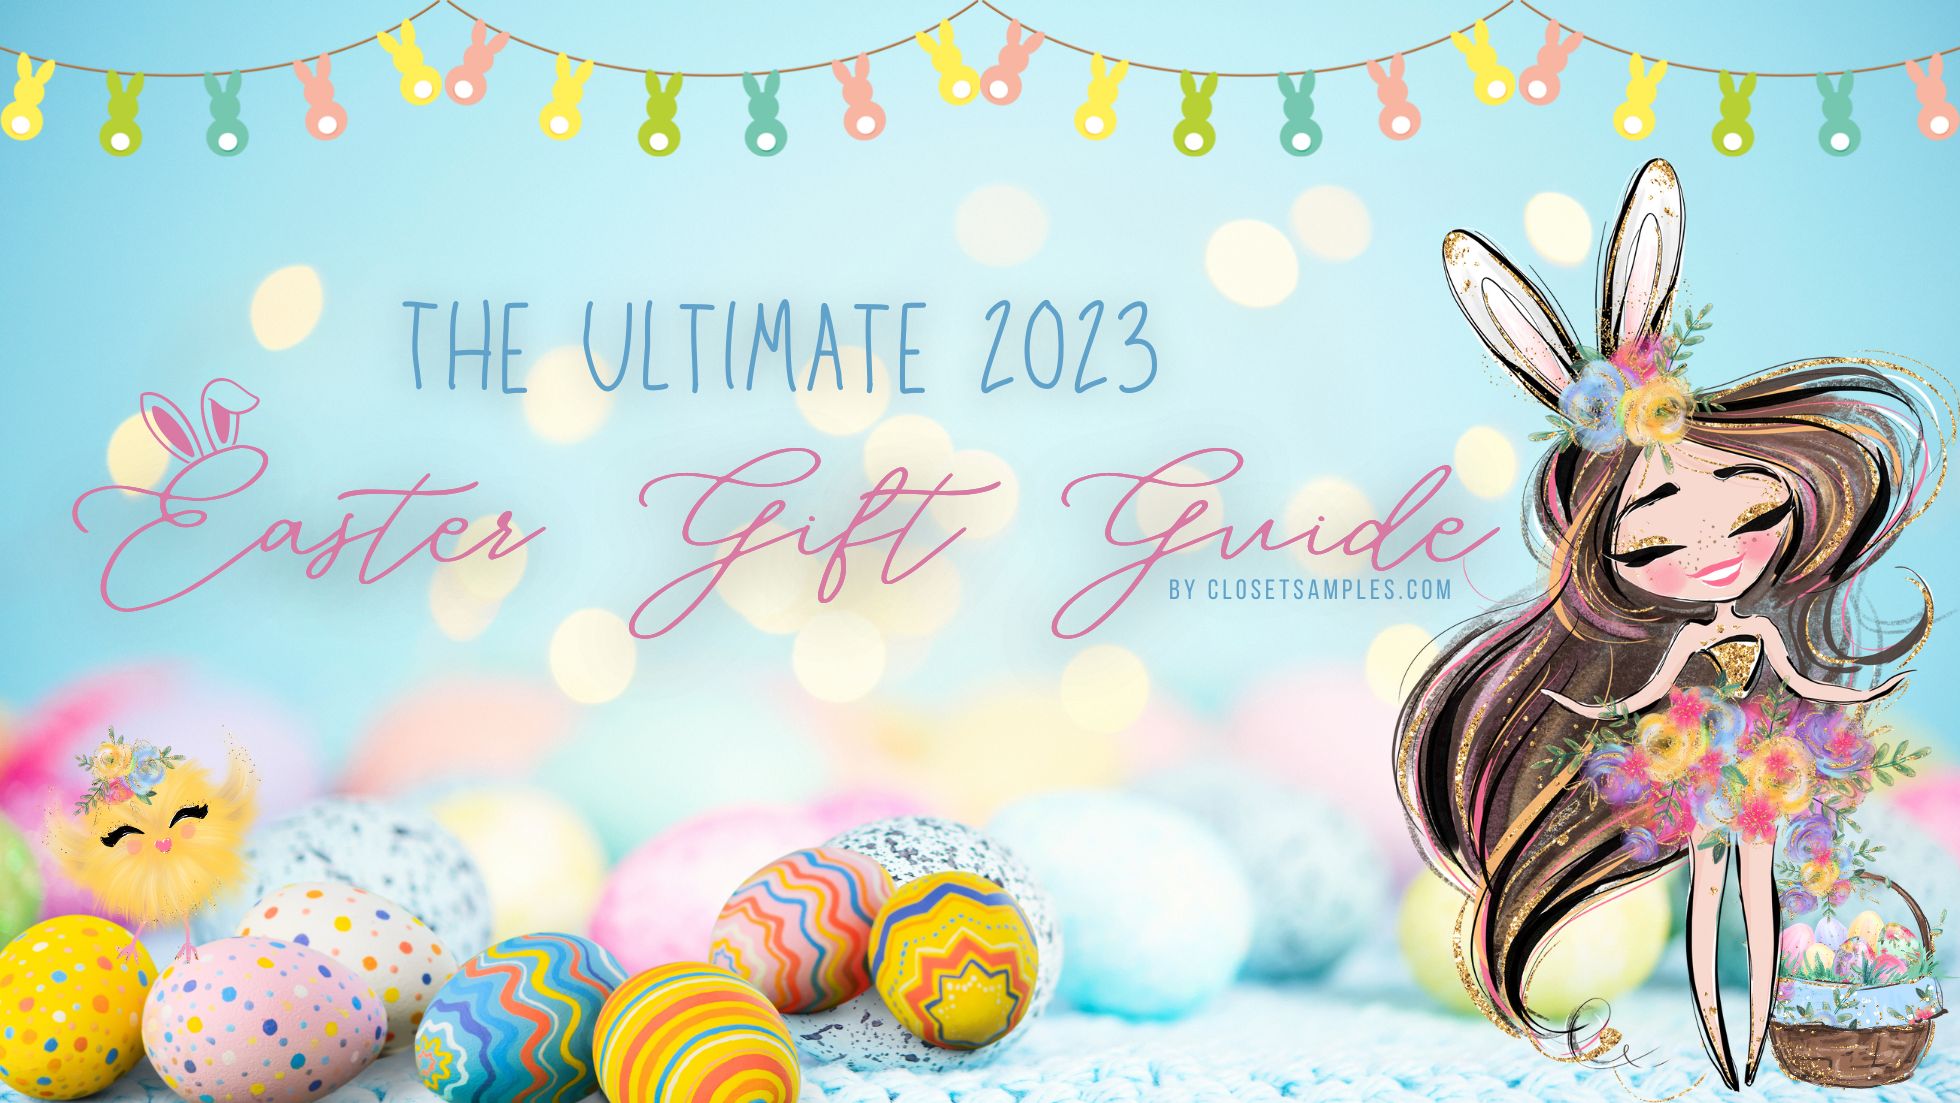 Discover the Ultimate Easter Gifts of 2023 - A Comprehensive Gift Guide